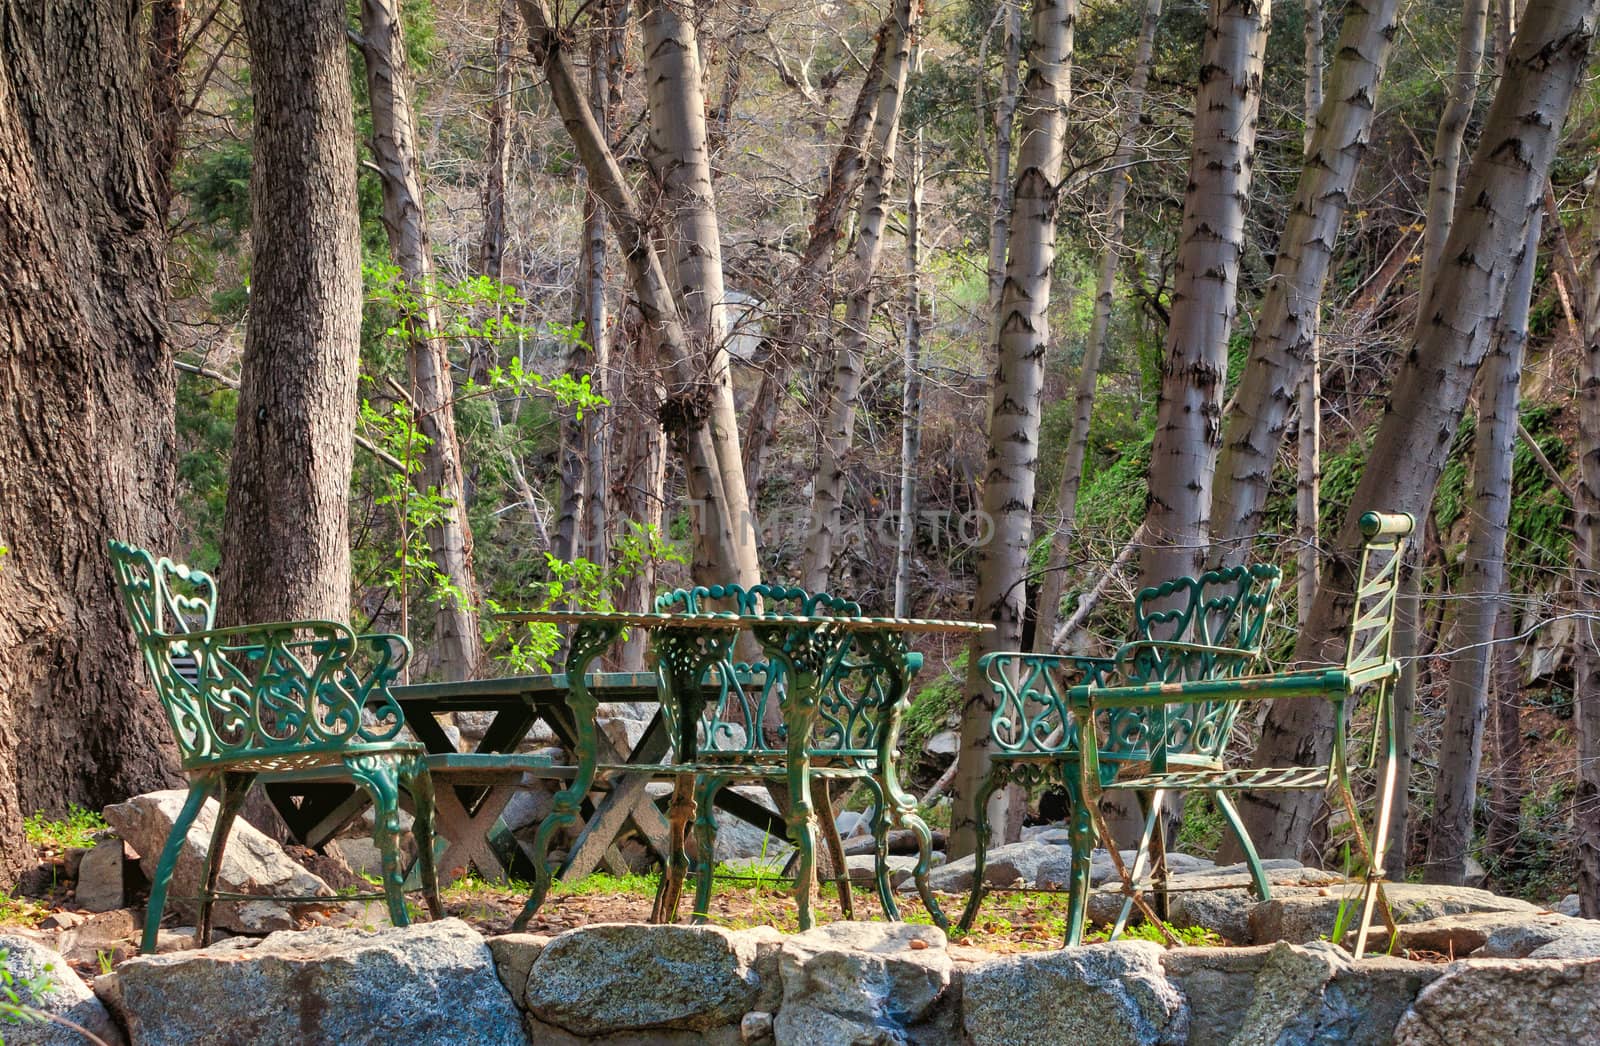 Table and Chairs in the Forest at Chantry Flats